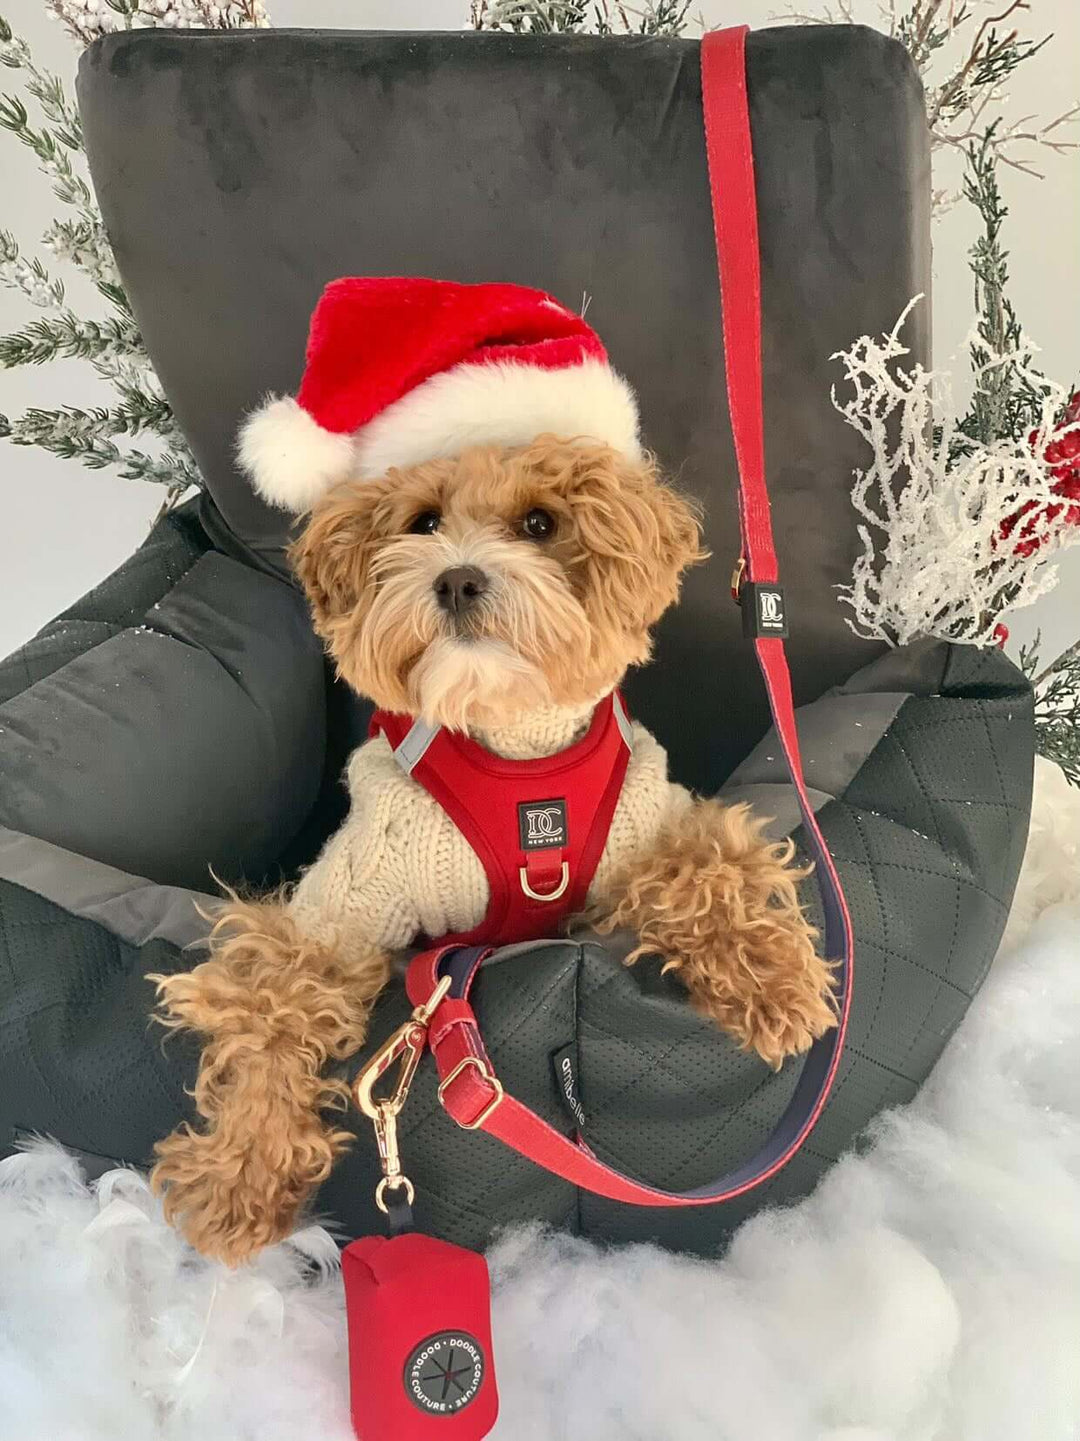 Making Seasons Bark! 10 Tips For Spending The Holidays With Your Dog